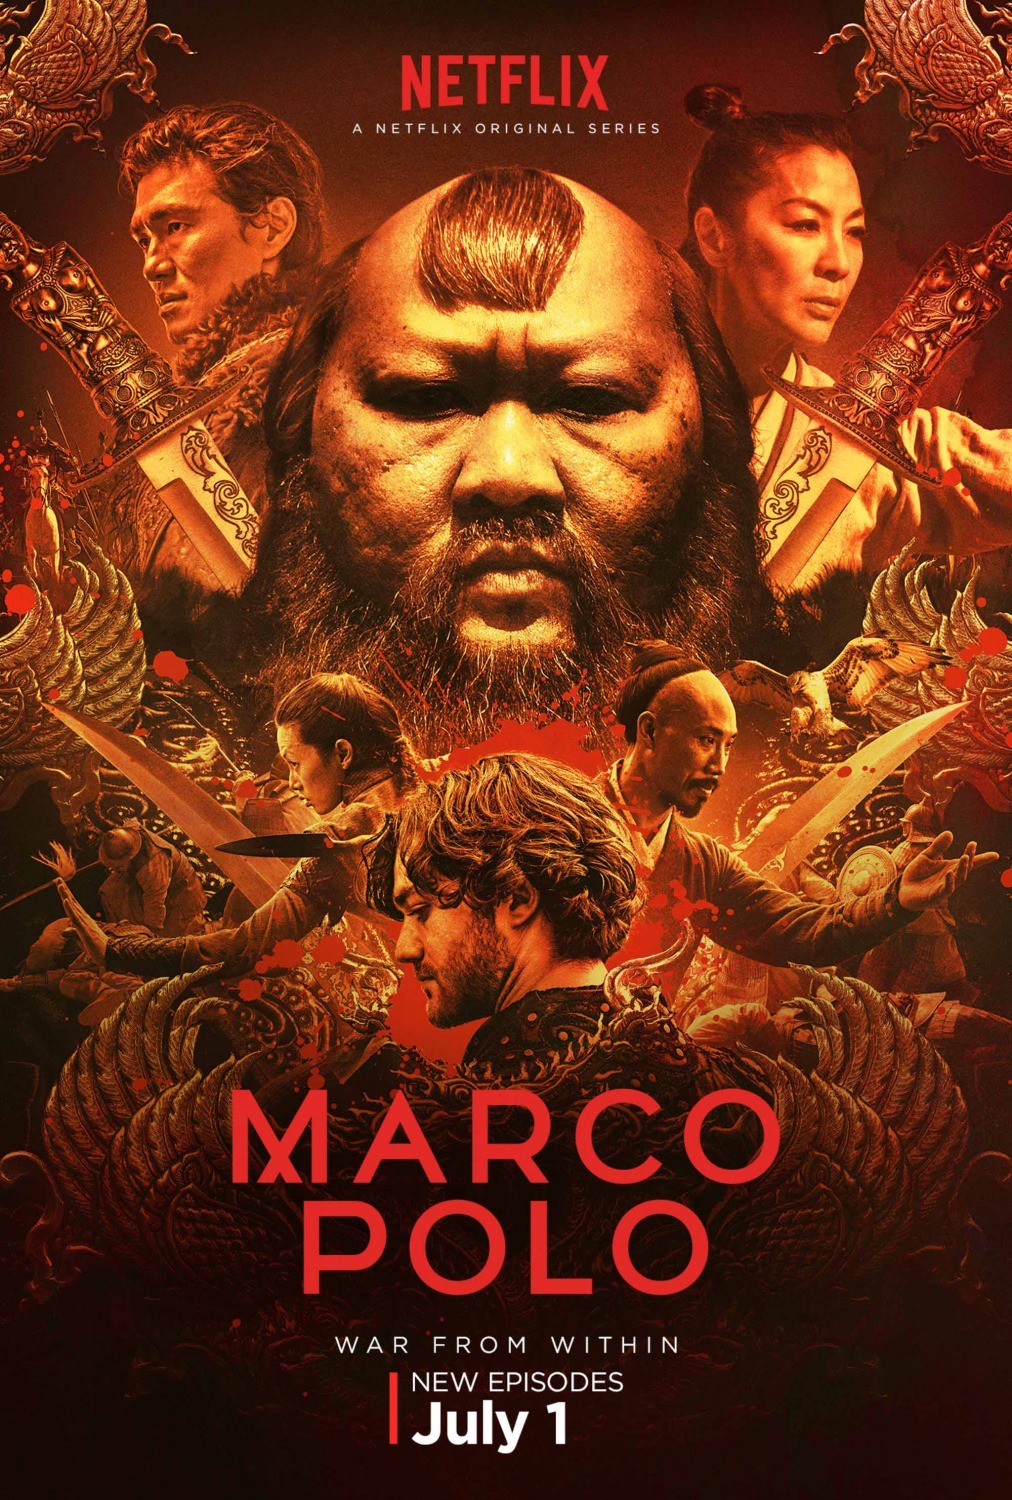 difficult instead did it Marco Polo - Marco Polo (2014) - Film serial - CineMagia.ro